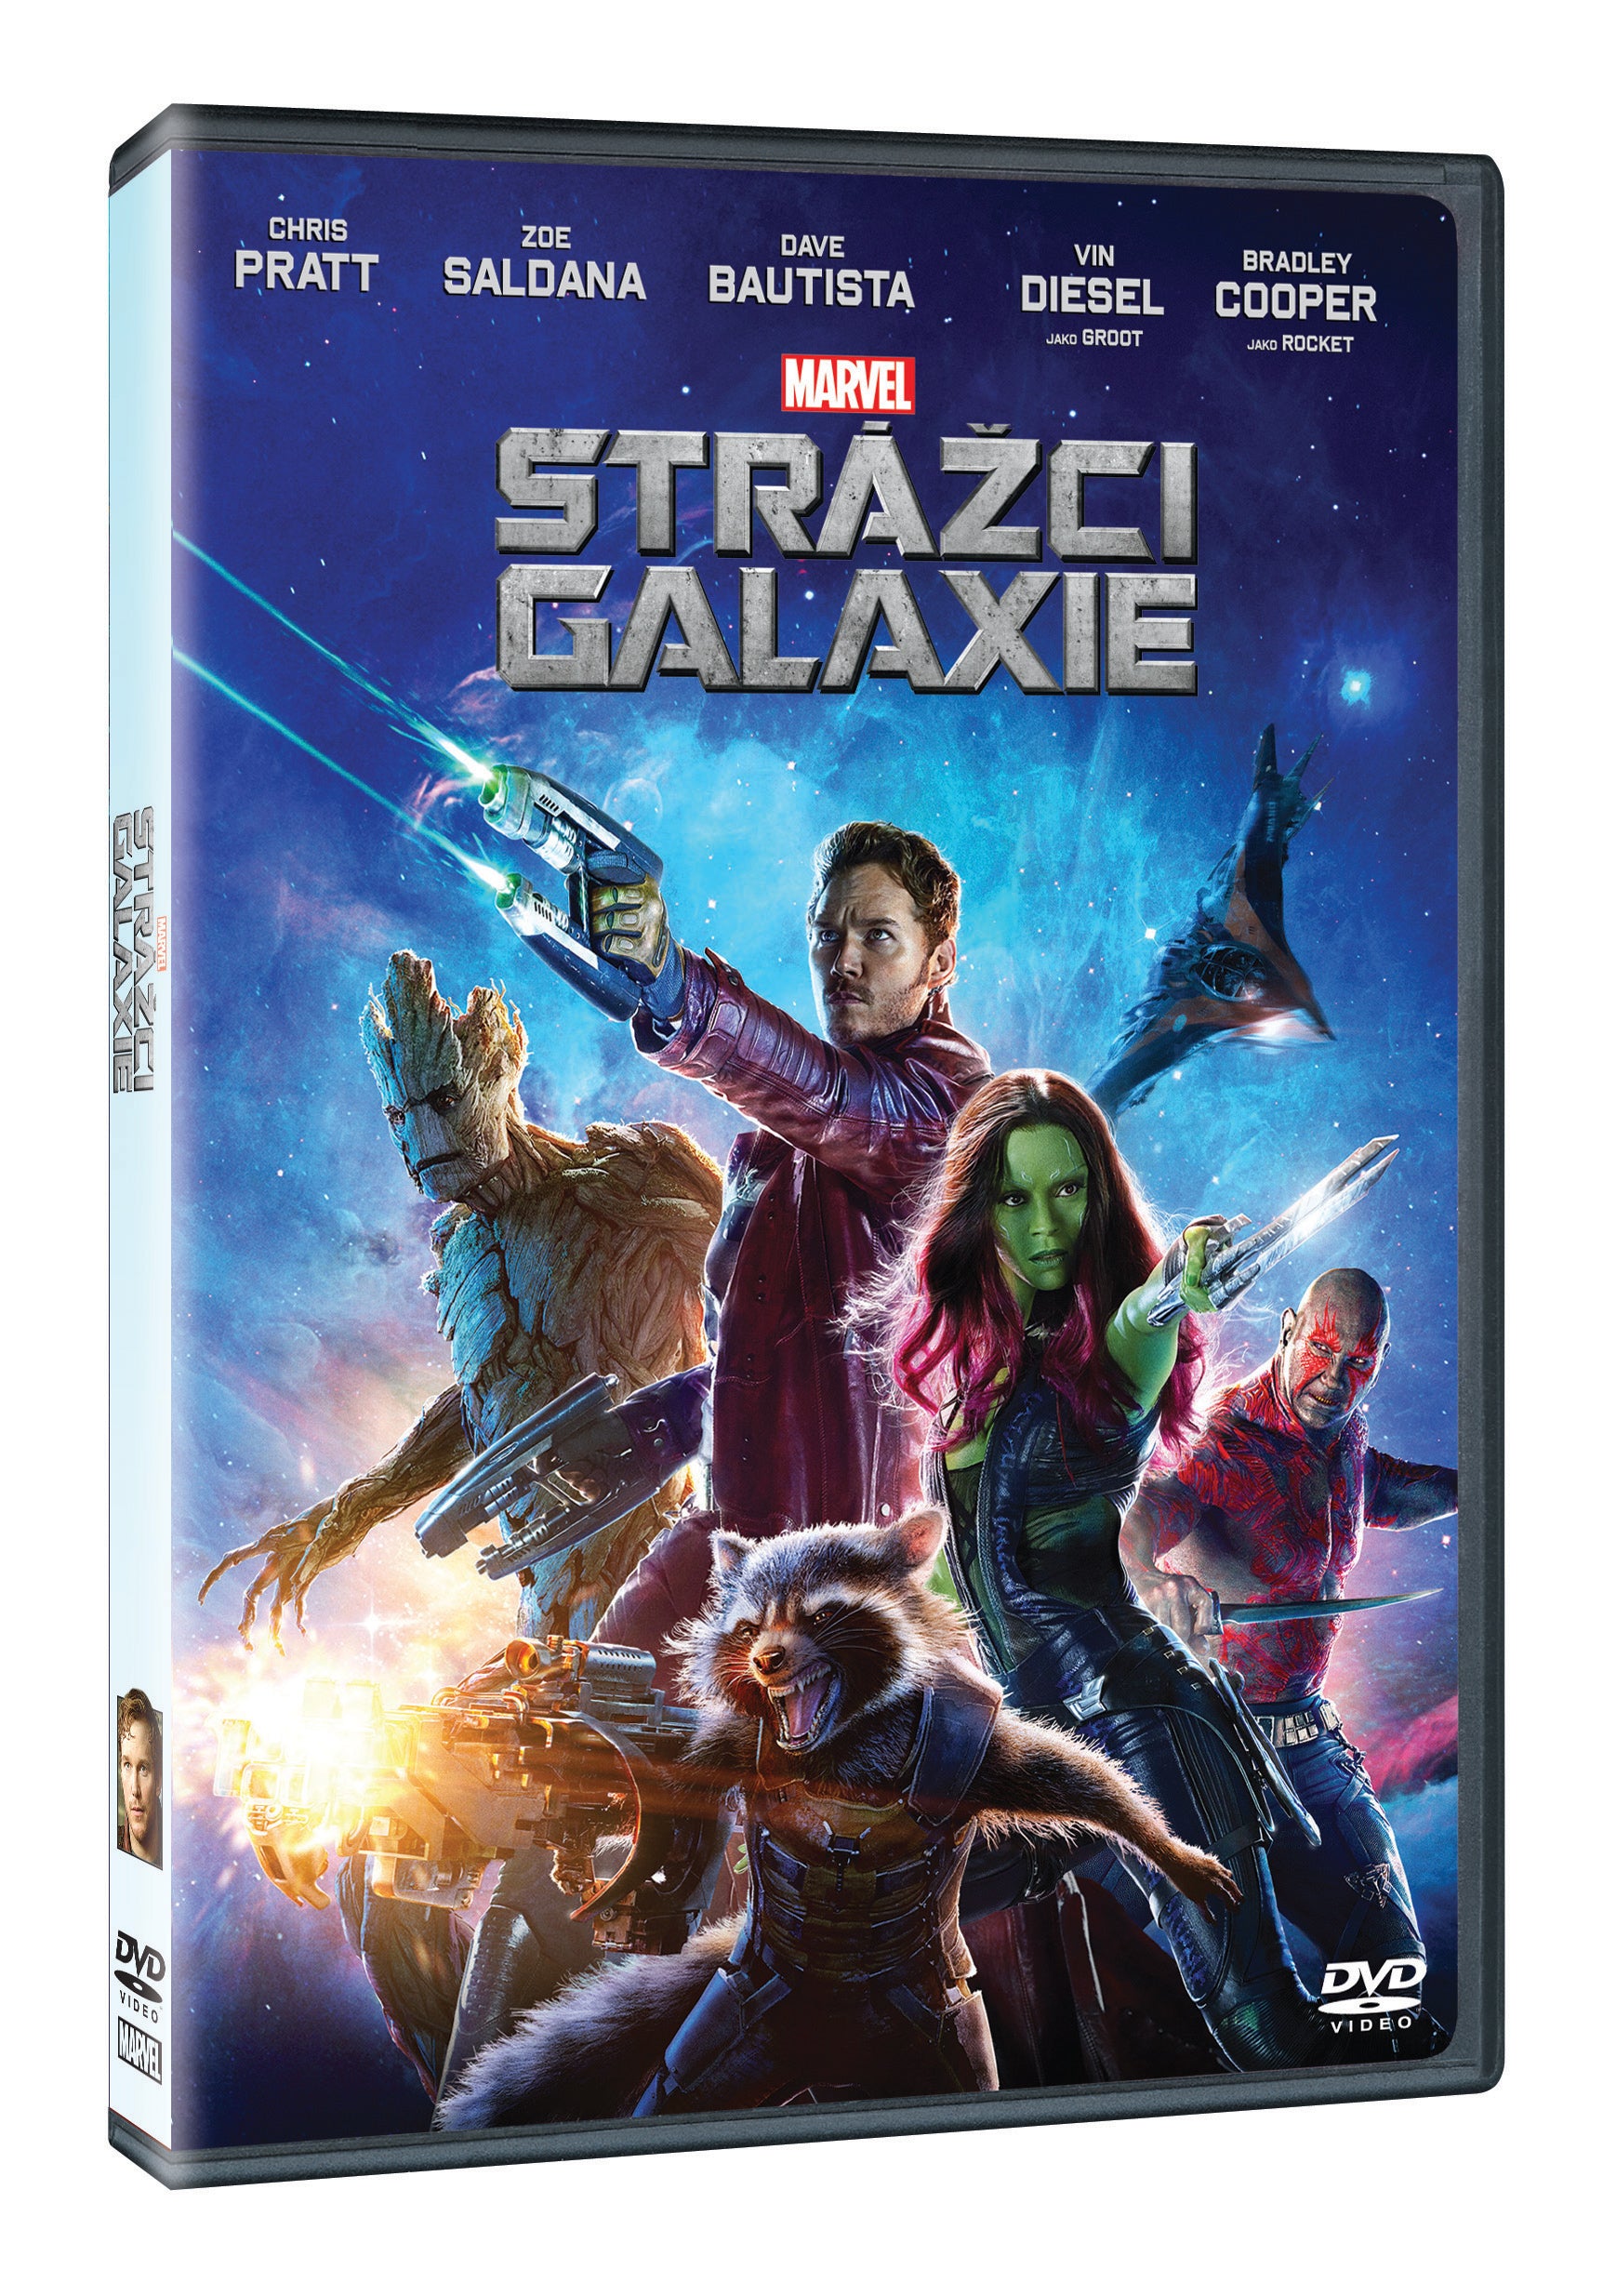 Strazci Galaxie DVD / Guardians of the Galaxy